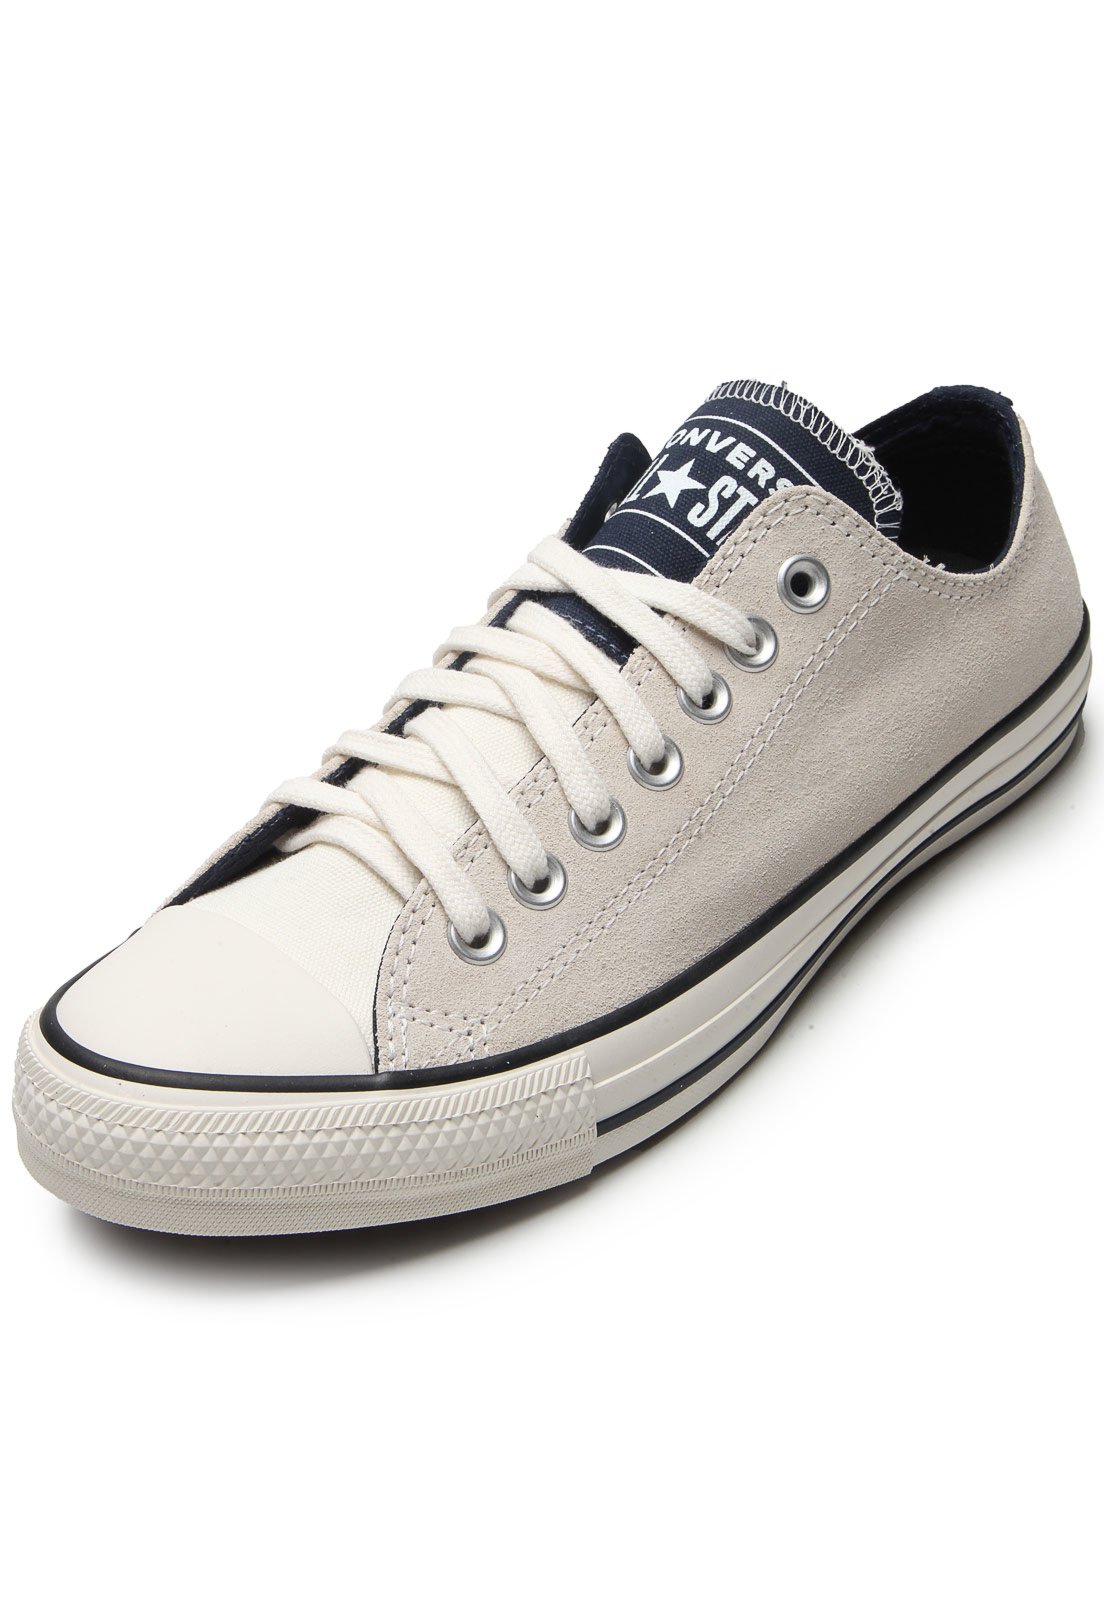 all star converse couro bege